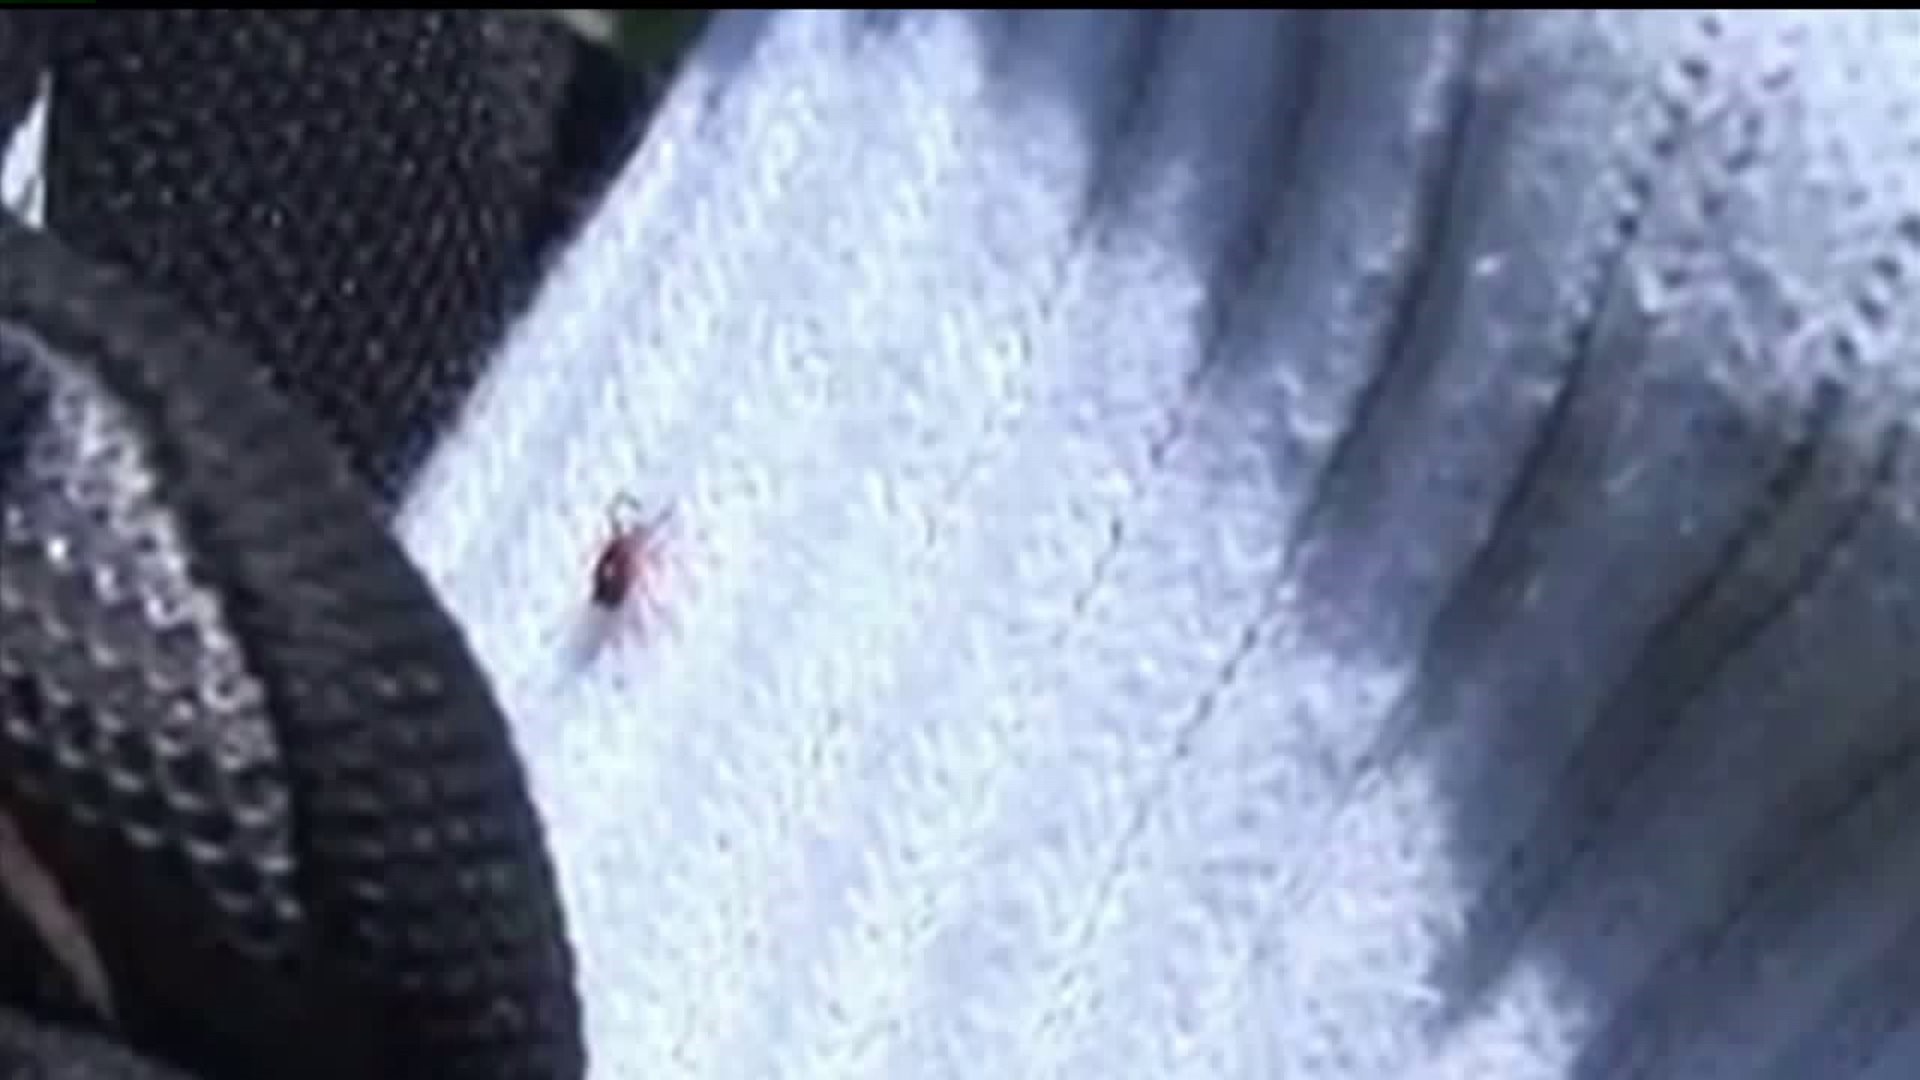 Illness caused by ticks on the rise in Illinois